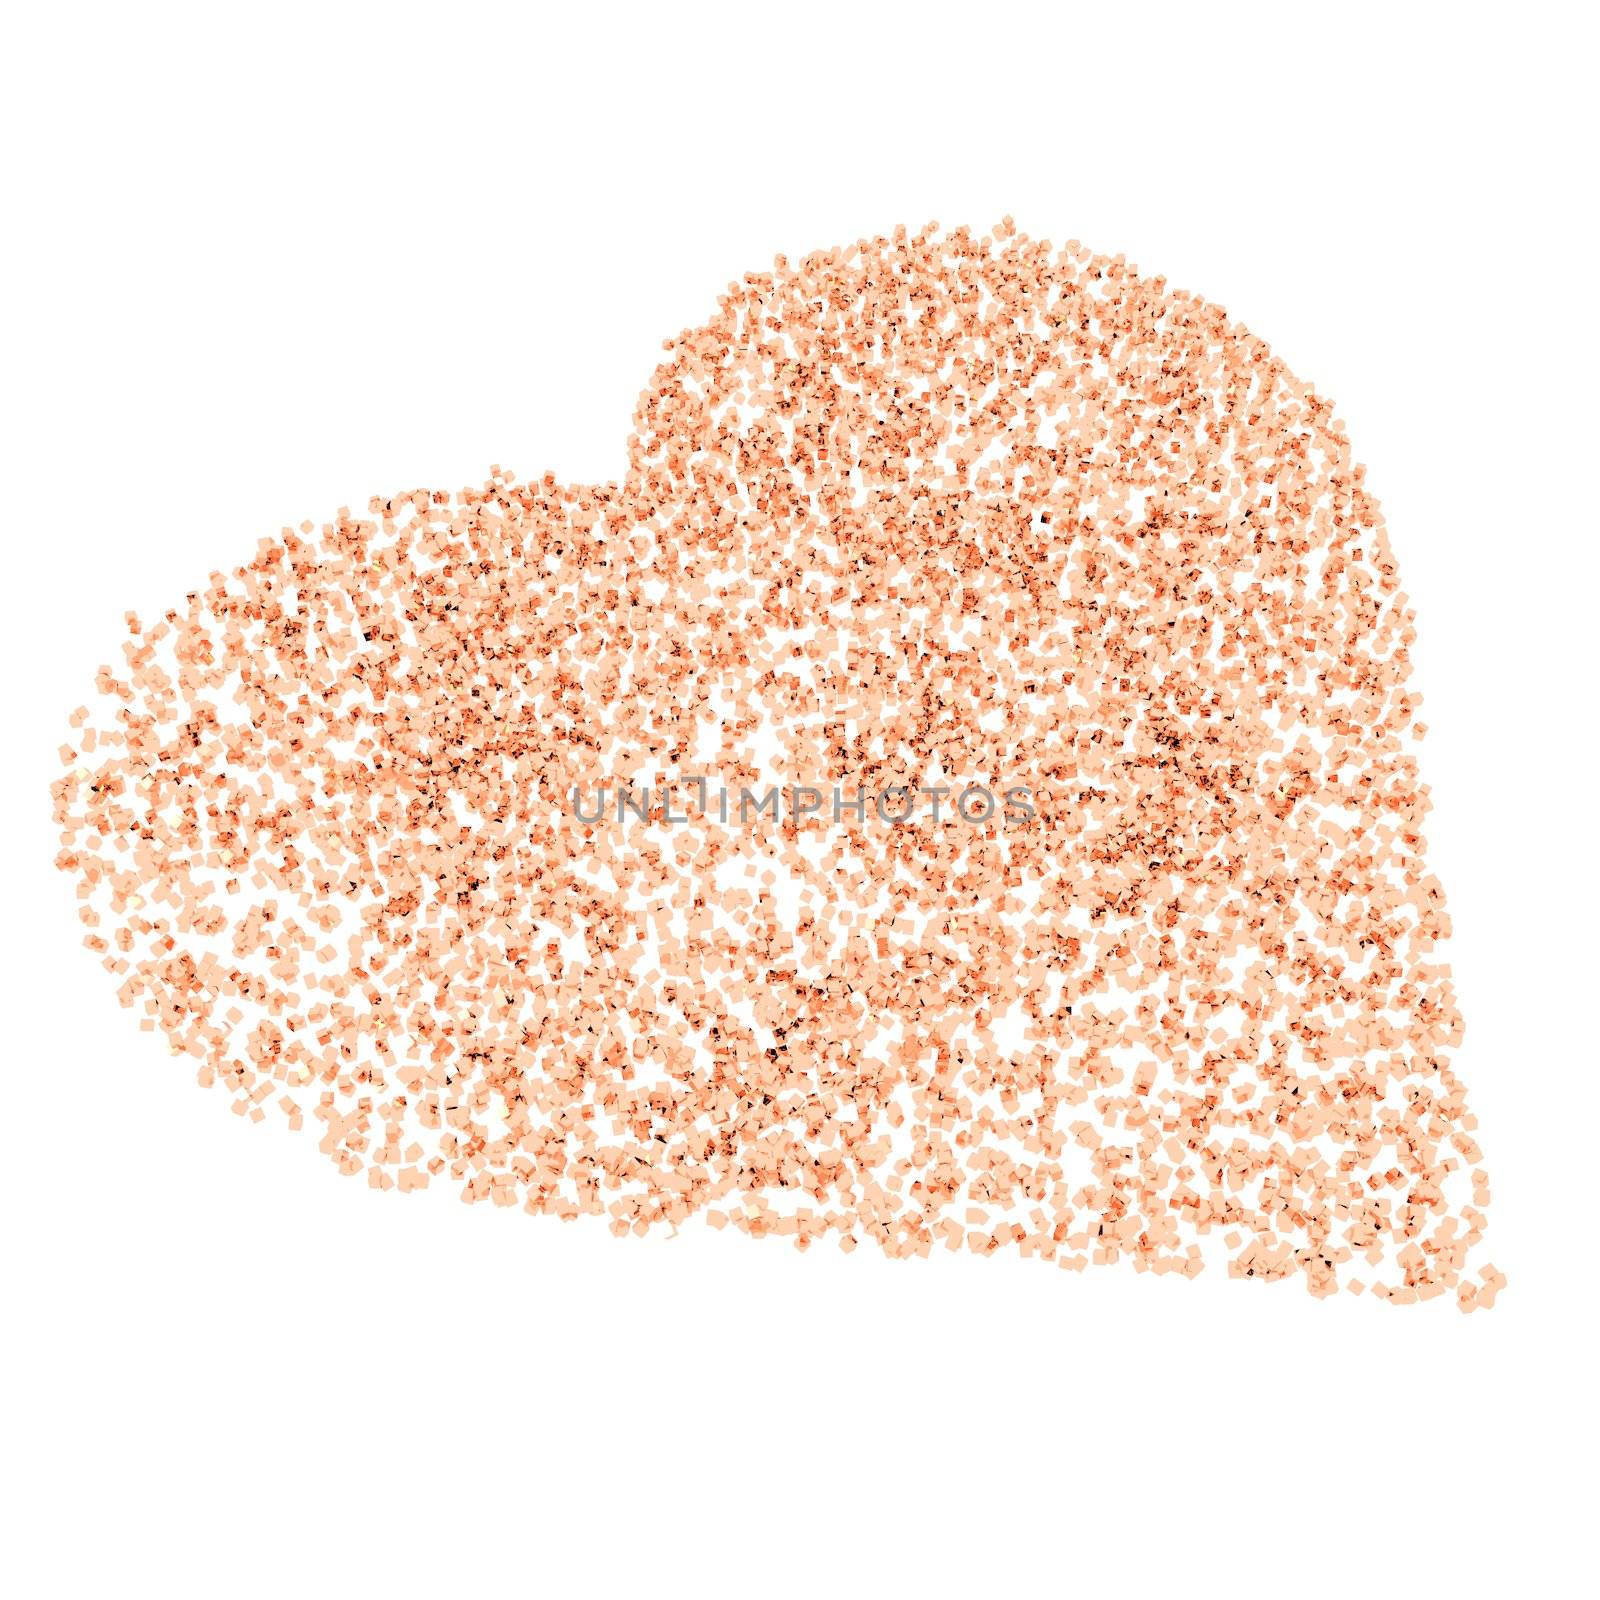 A unique valentine’s Day heart created using pink cubic particles, isolated on a white background.